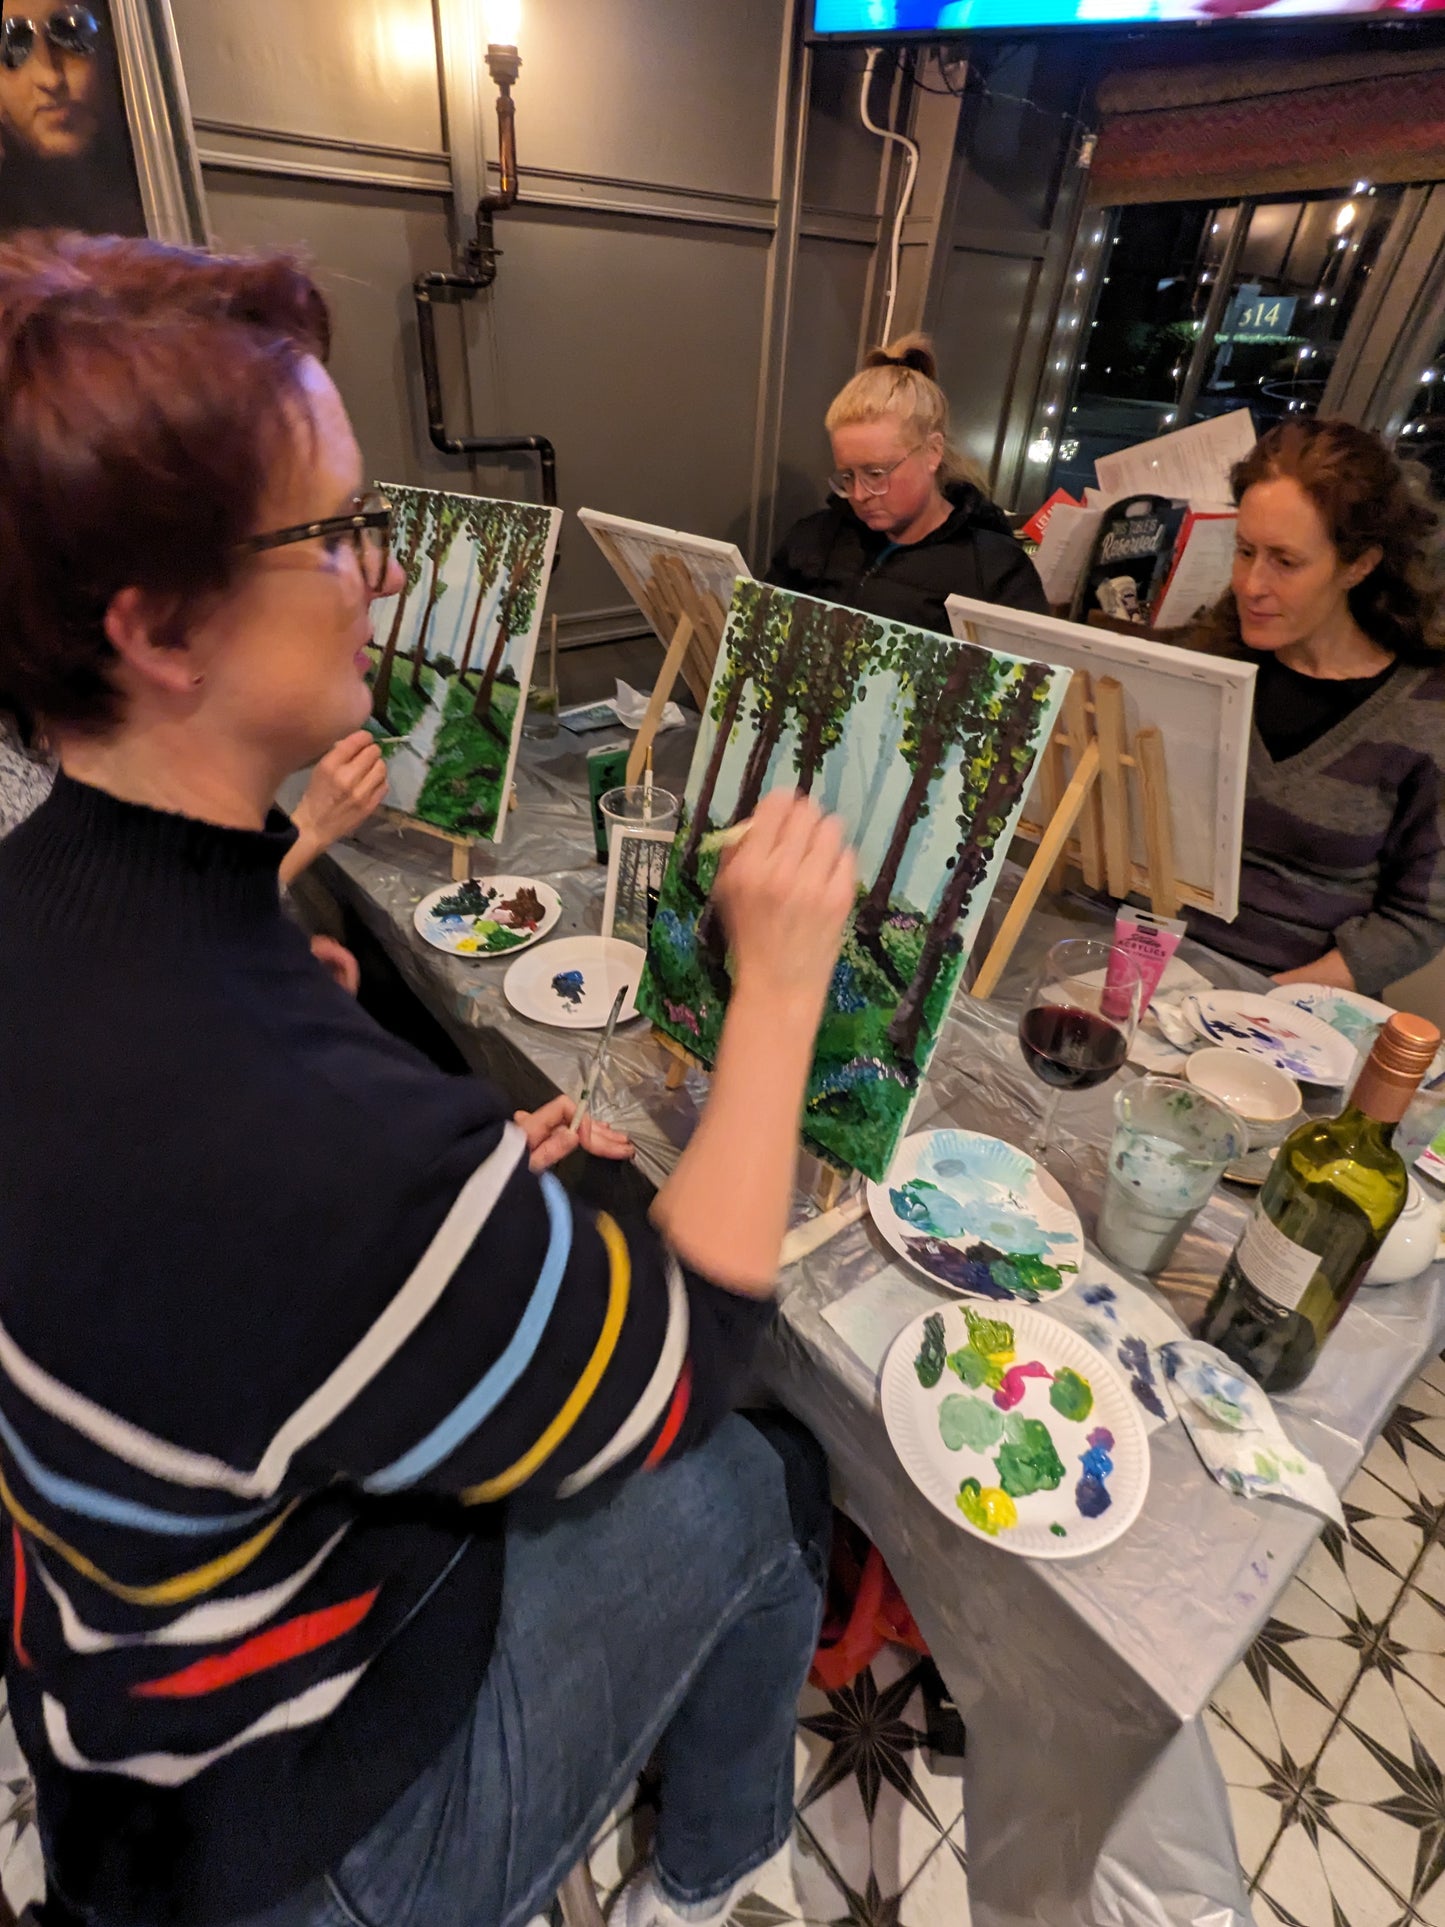 HOST YOUR OWN PAINTING WORKSHOP - Any theme